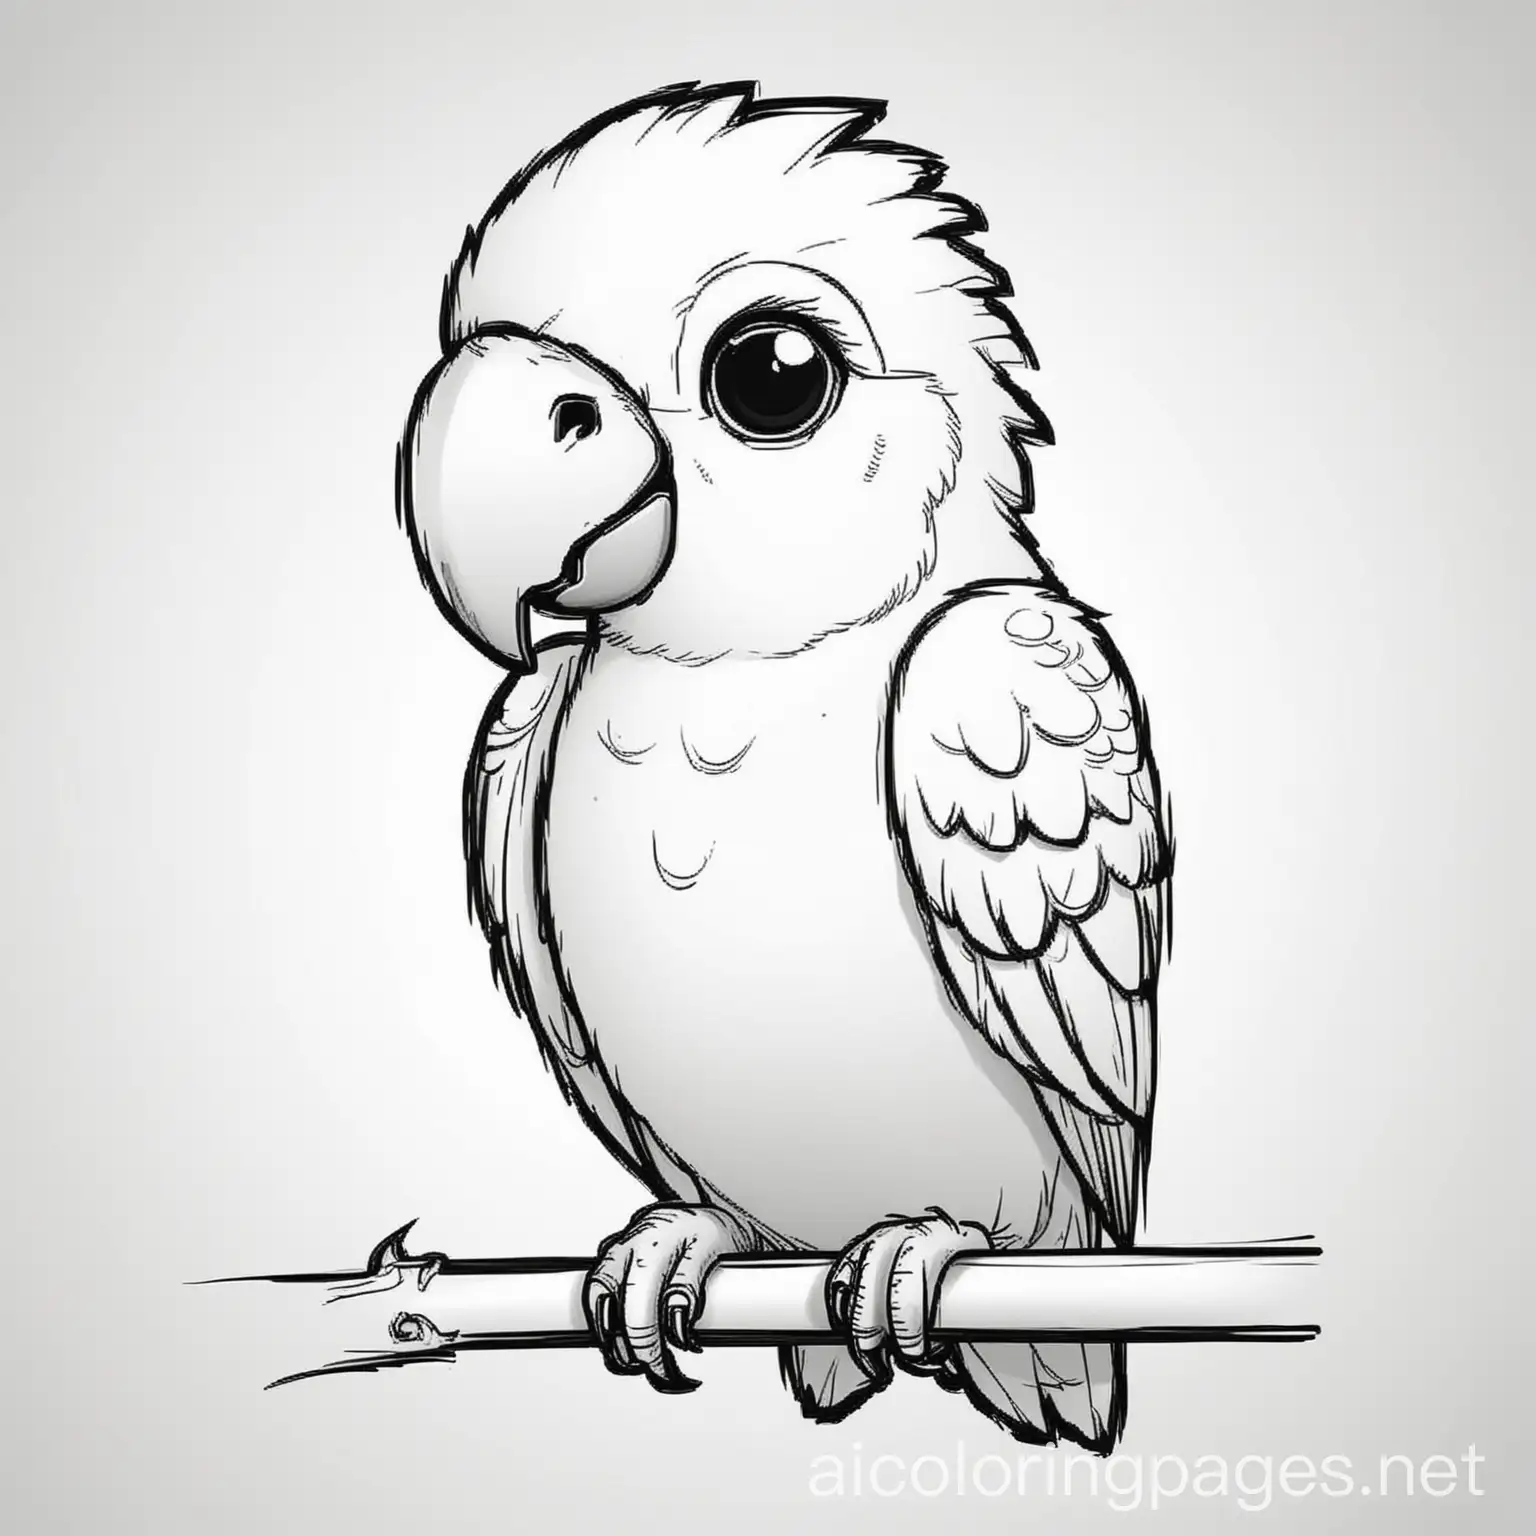 Coloring-Page-of-a-Cute-Parrot-in-Black-and-White